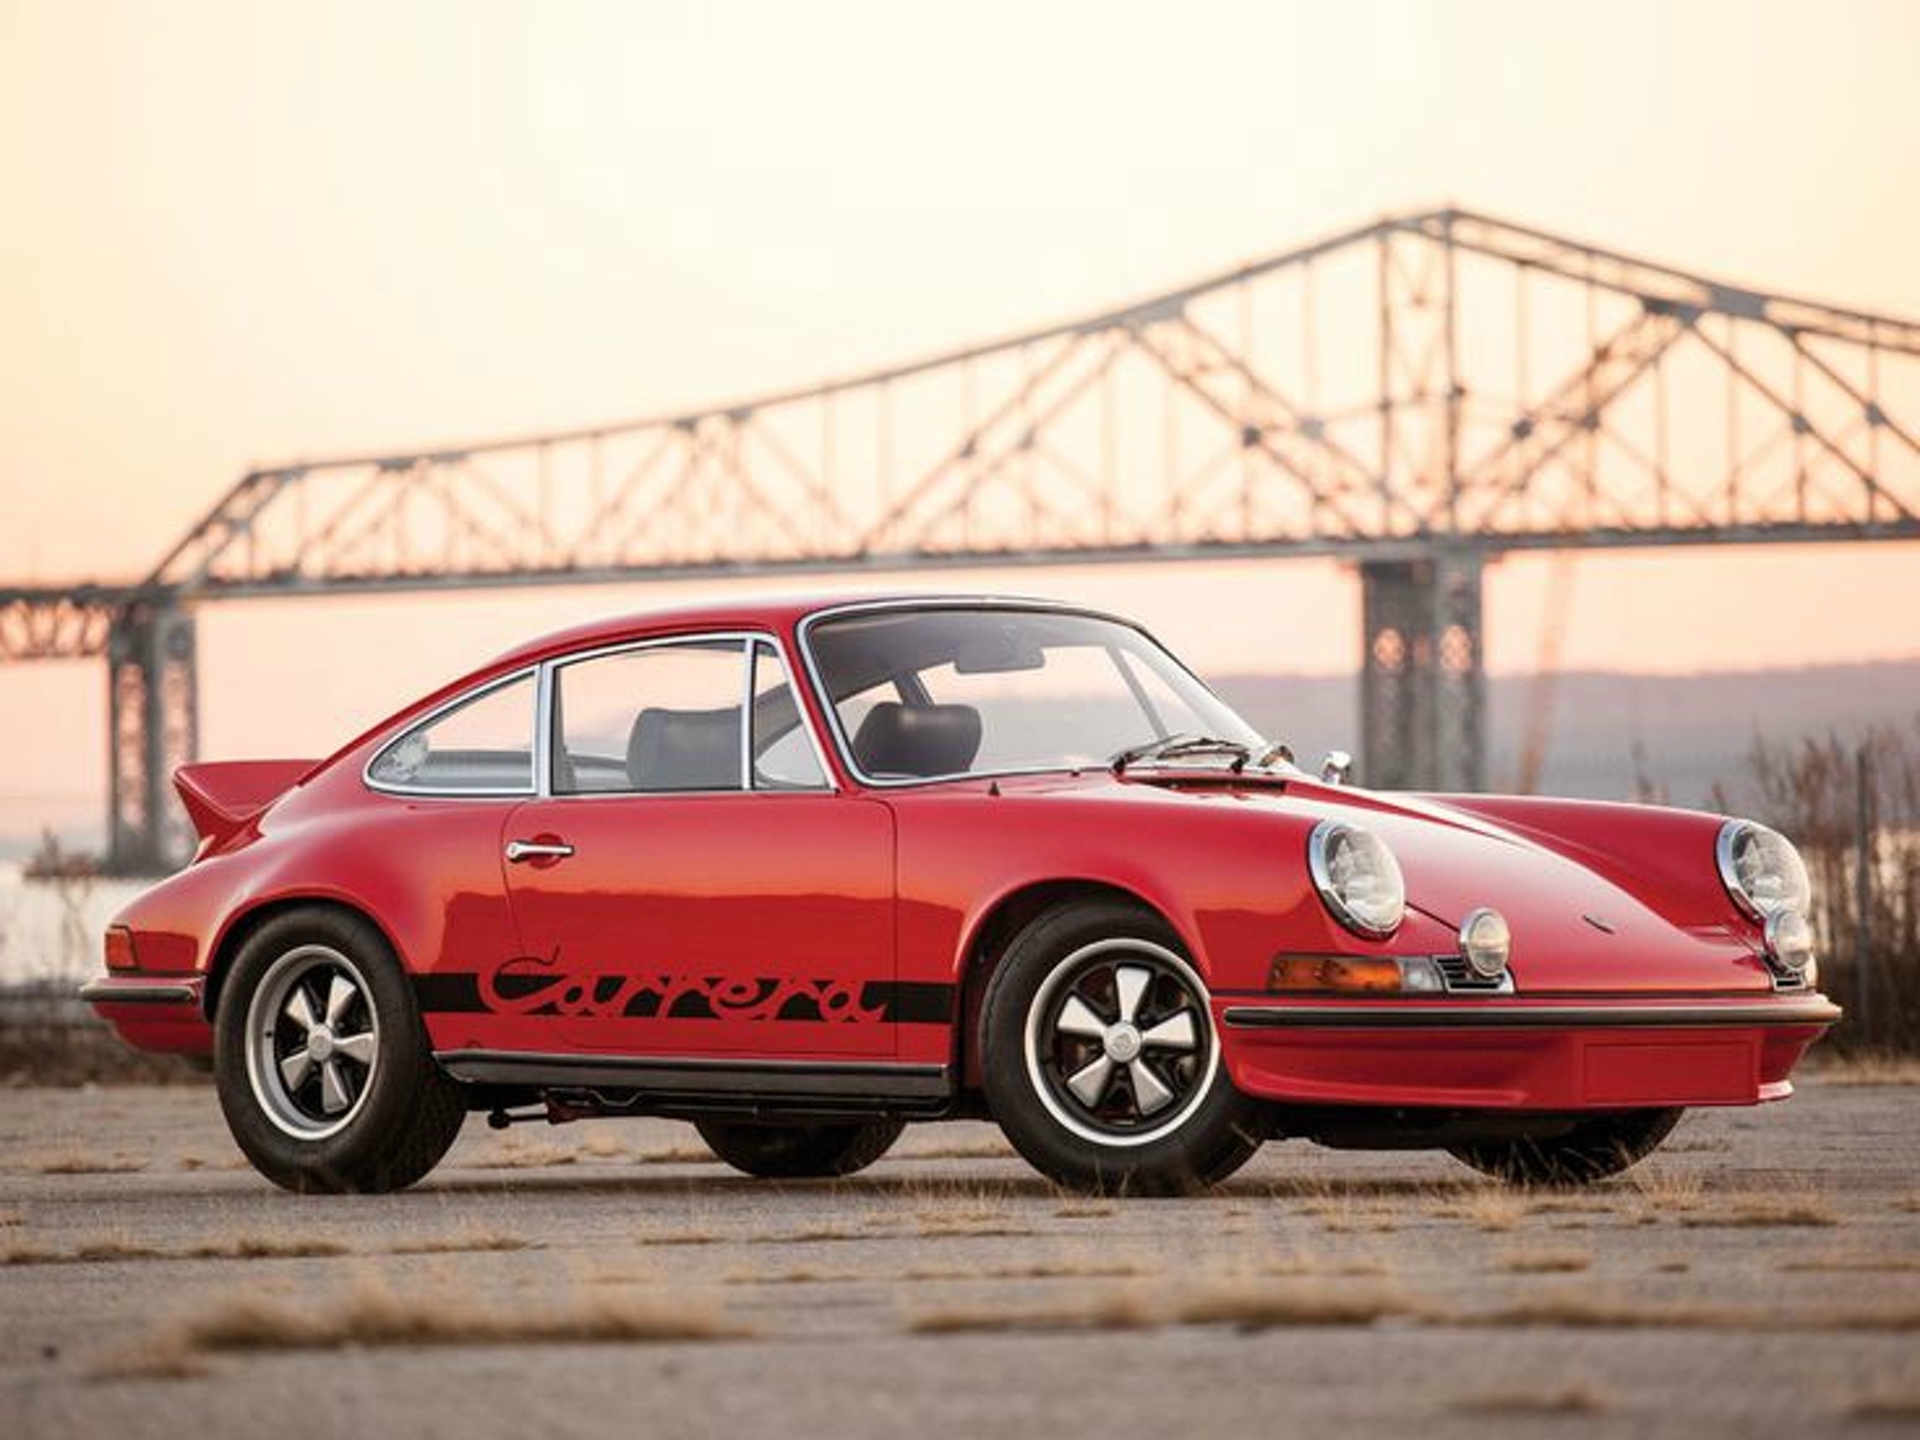 The perfect Porsche, the Carrera 2.7 RS. It just looks... right.